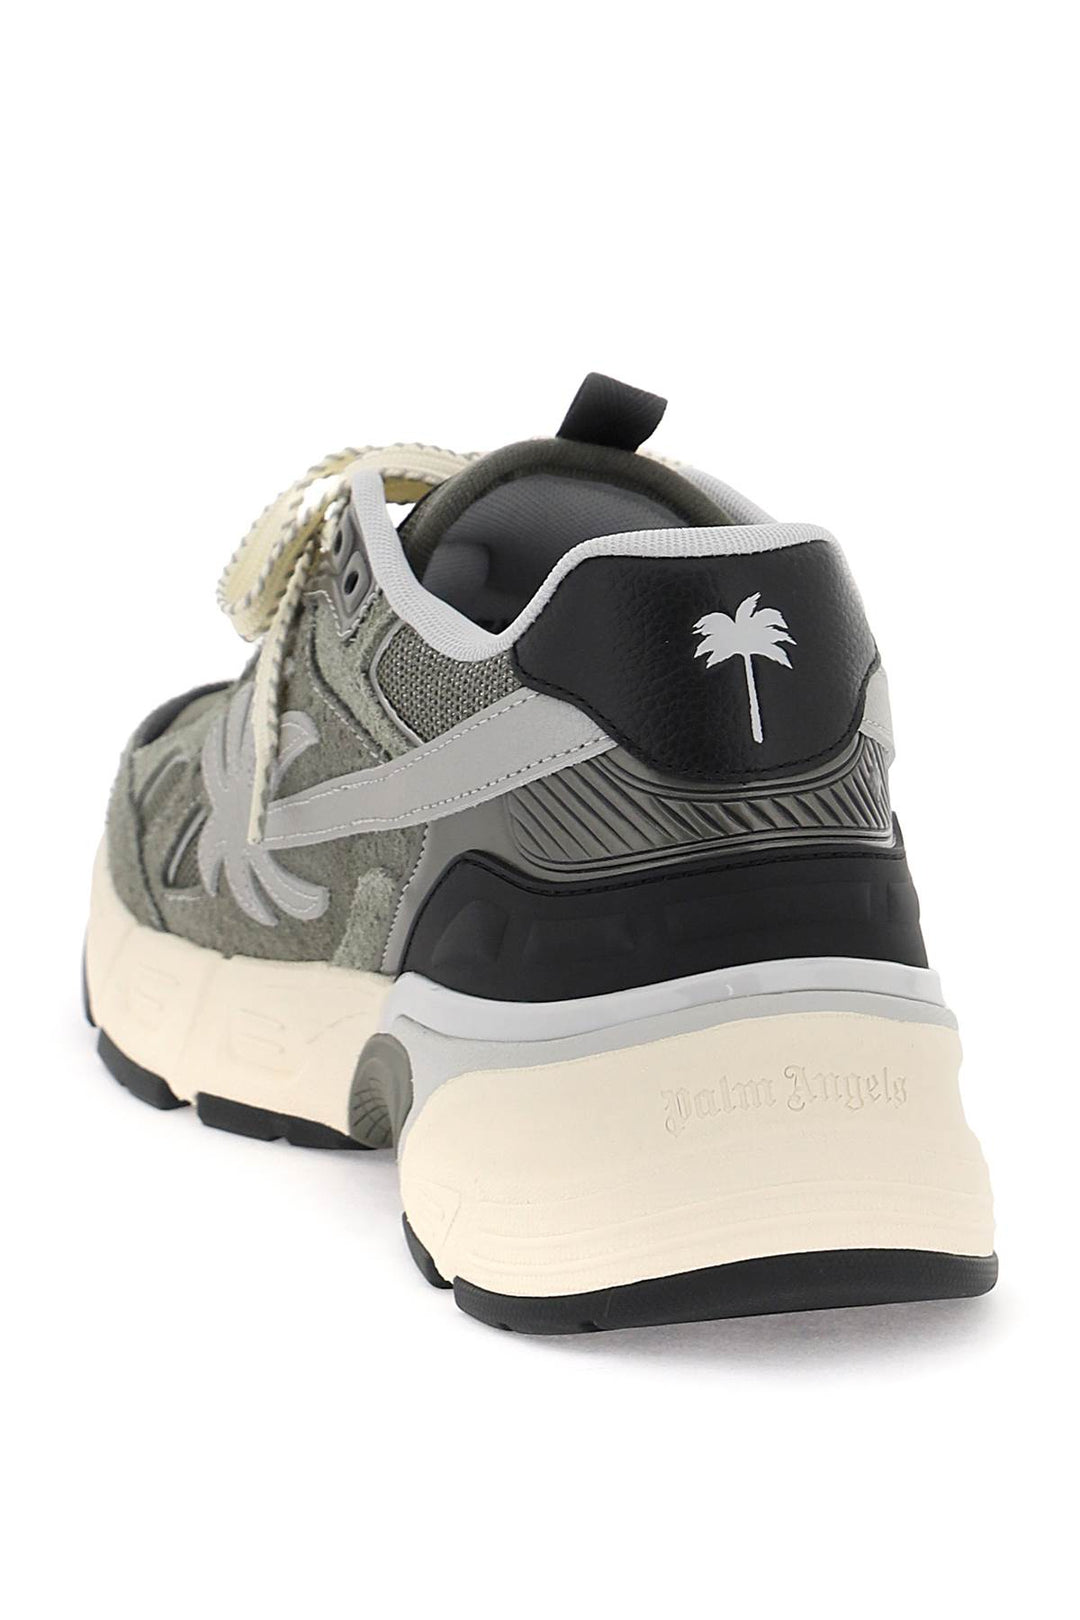 Palm Angels Palm Runner Sneakers For   Green